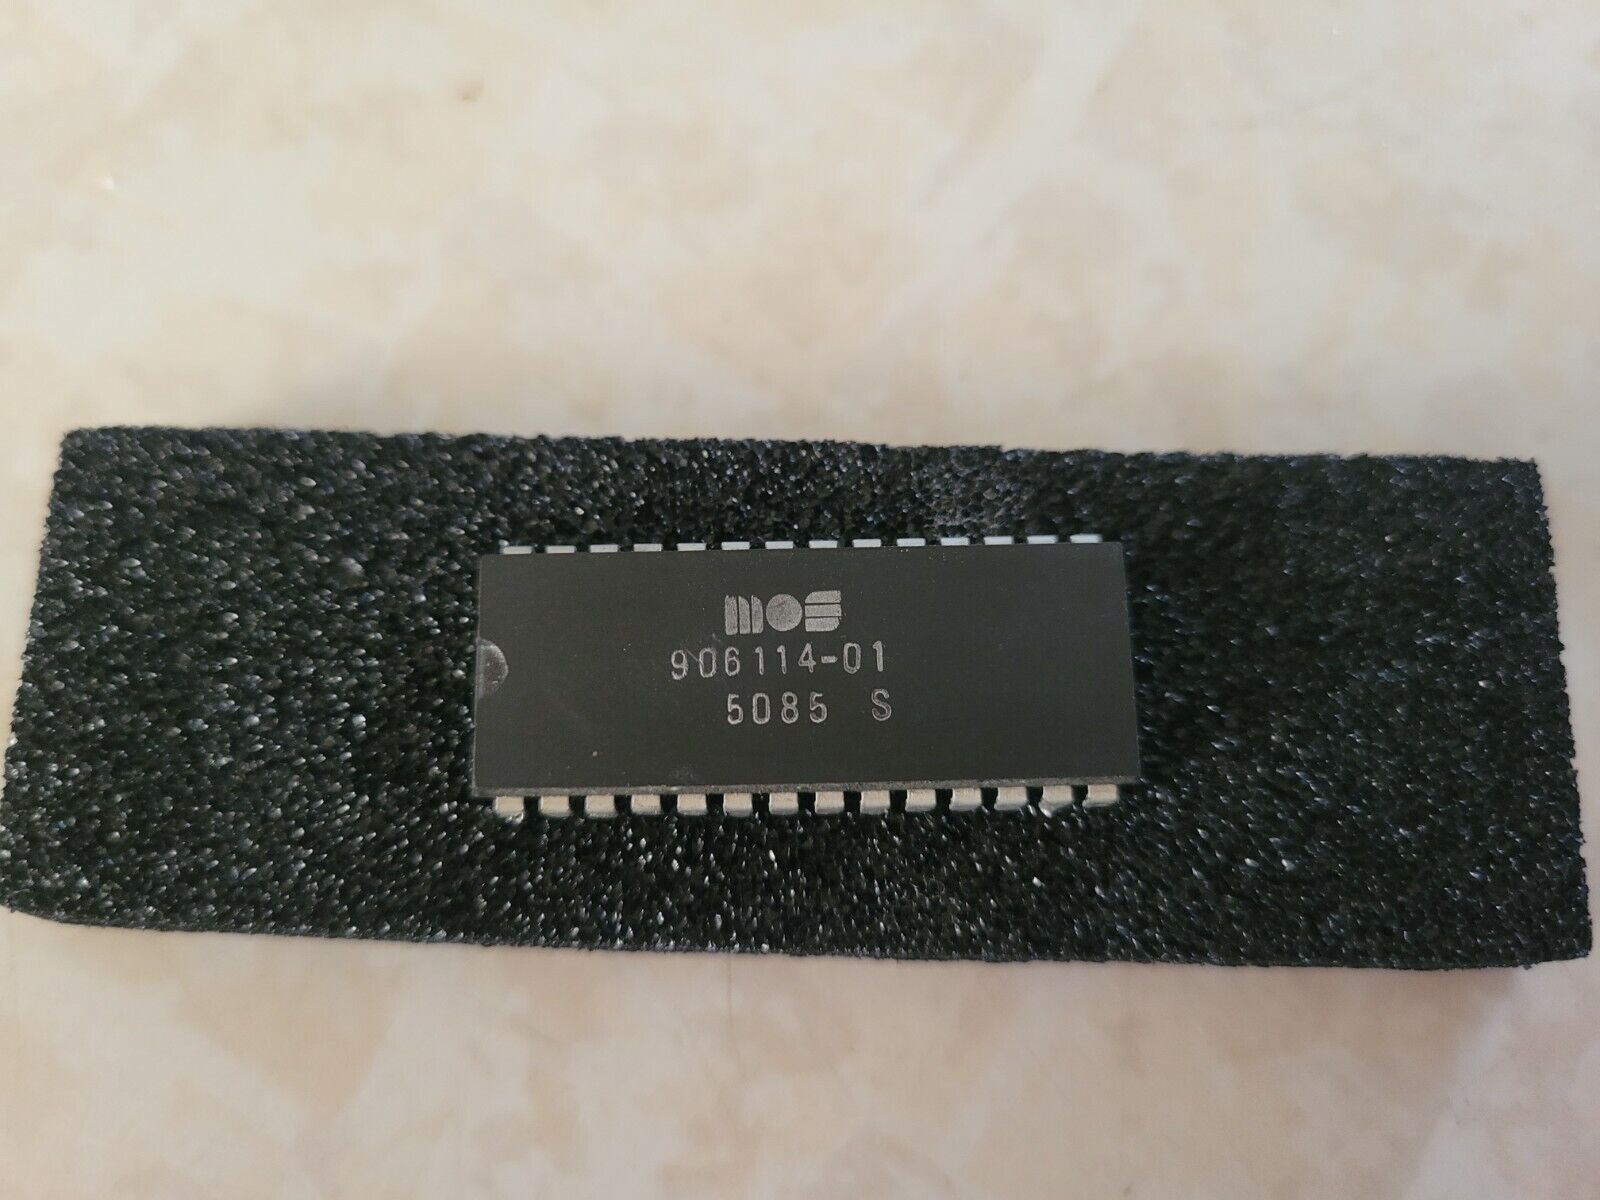 MOS 906114-01 PLA Chip for C64 - Good Tested Pull